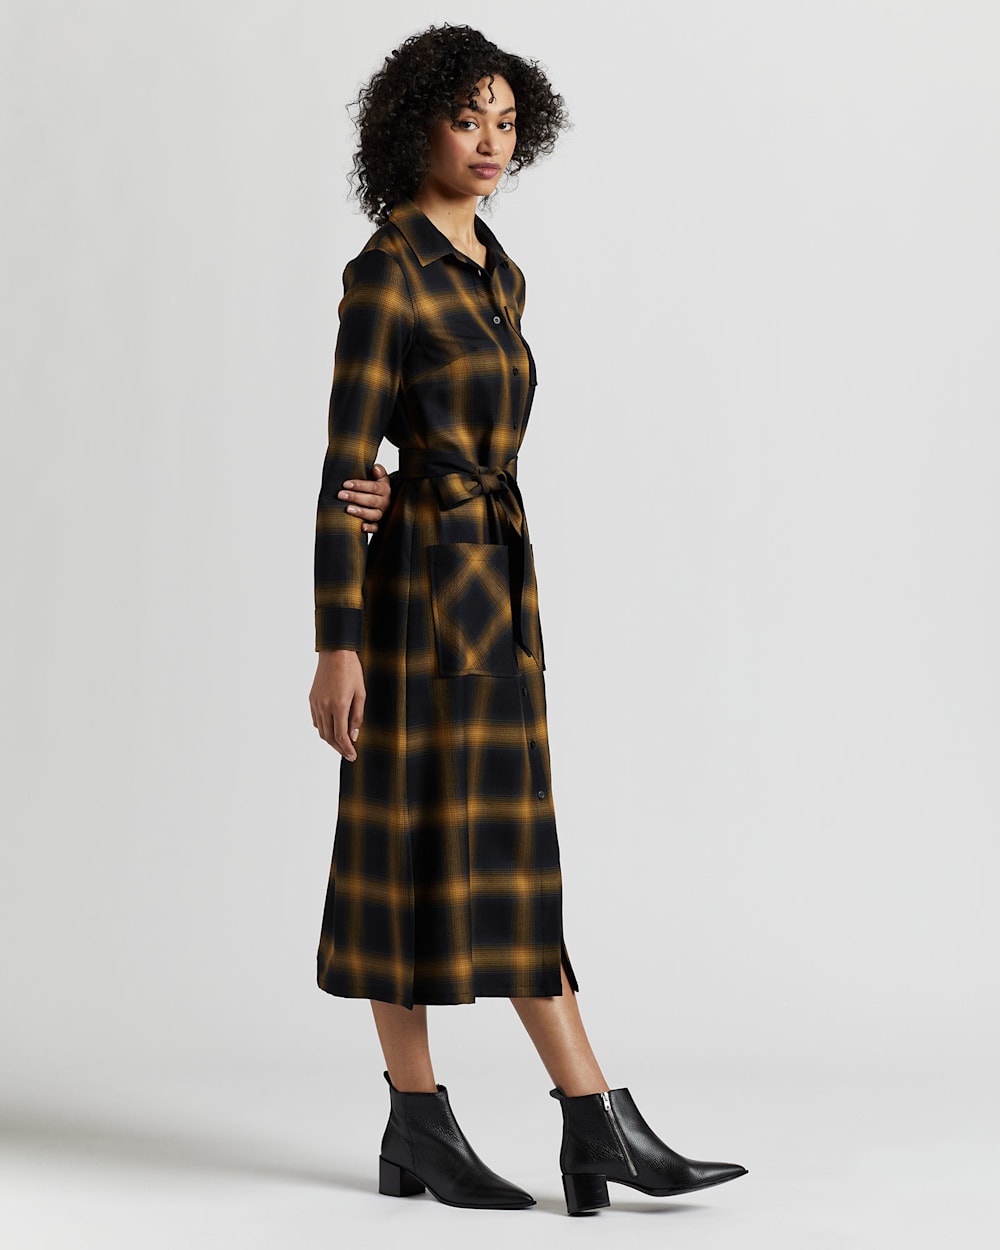 ALTERNATE VIEW OF WOMEN'S WOOL MIDI SHIRT DRESS IN BLACK/GOLD OMBRE image number 2